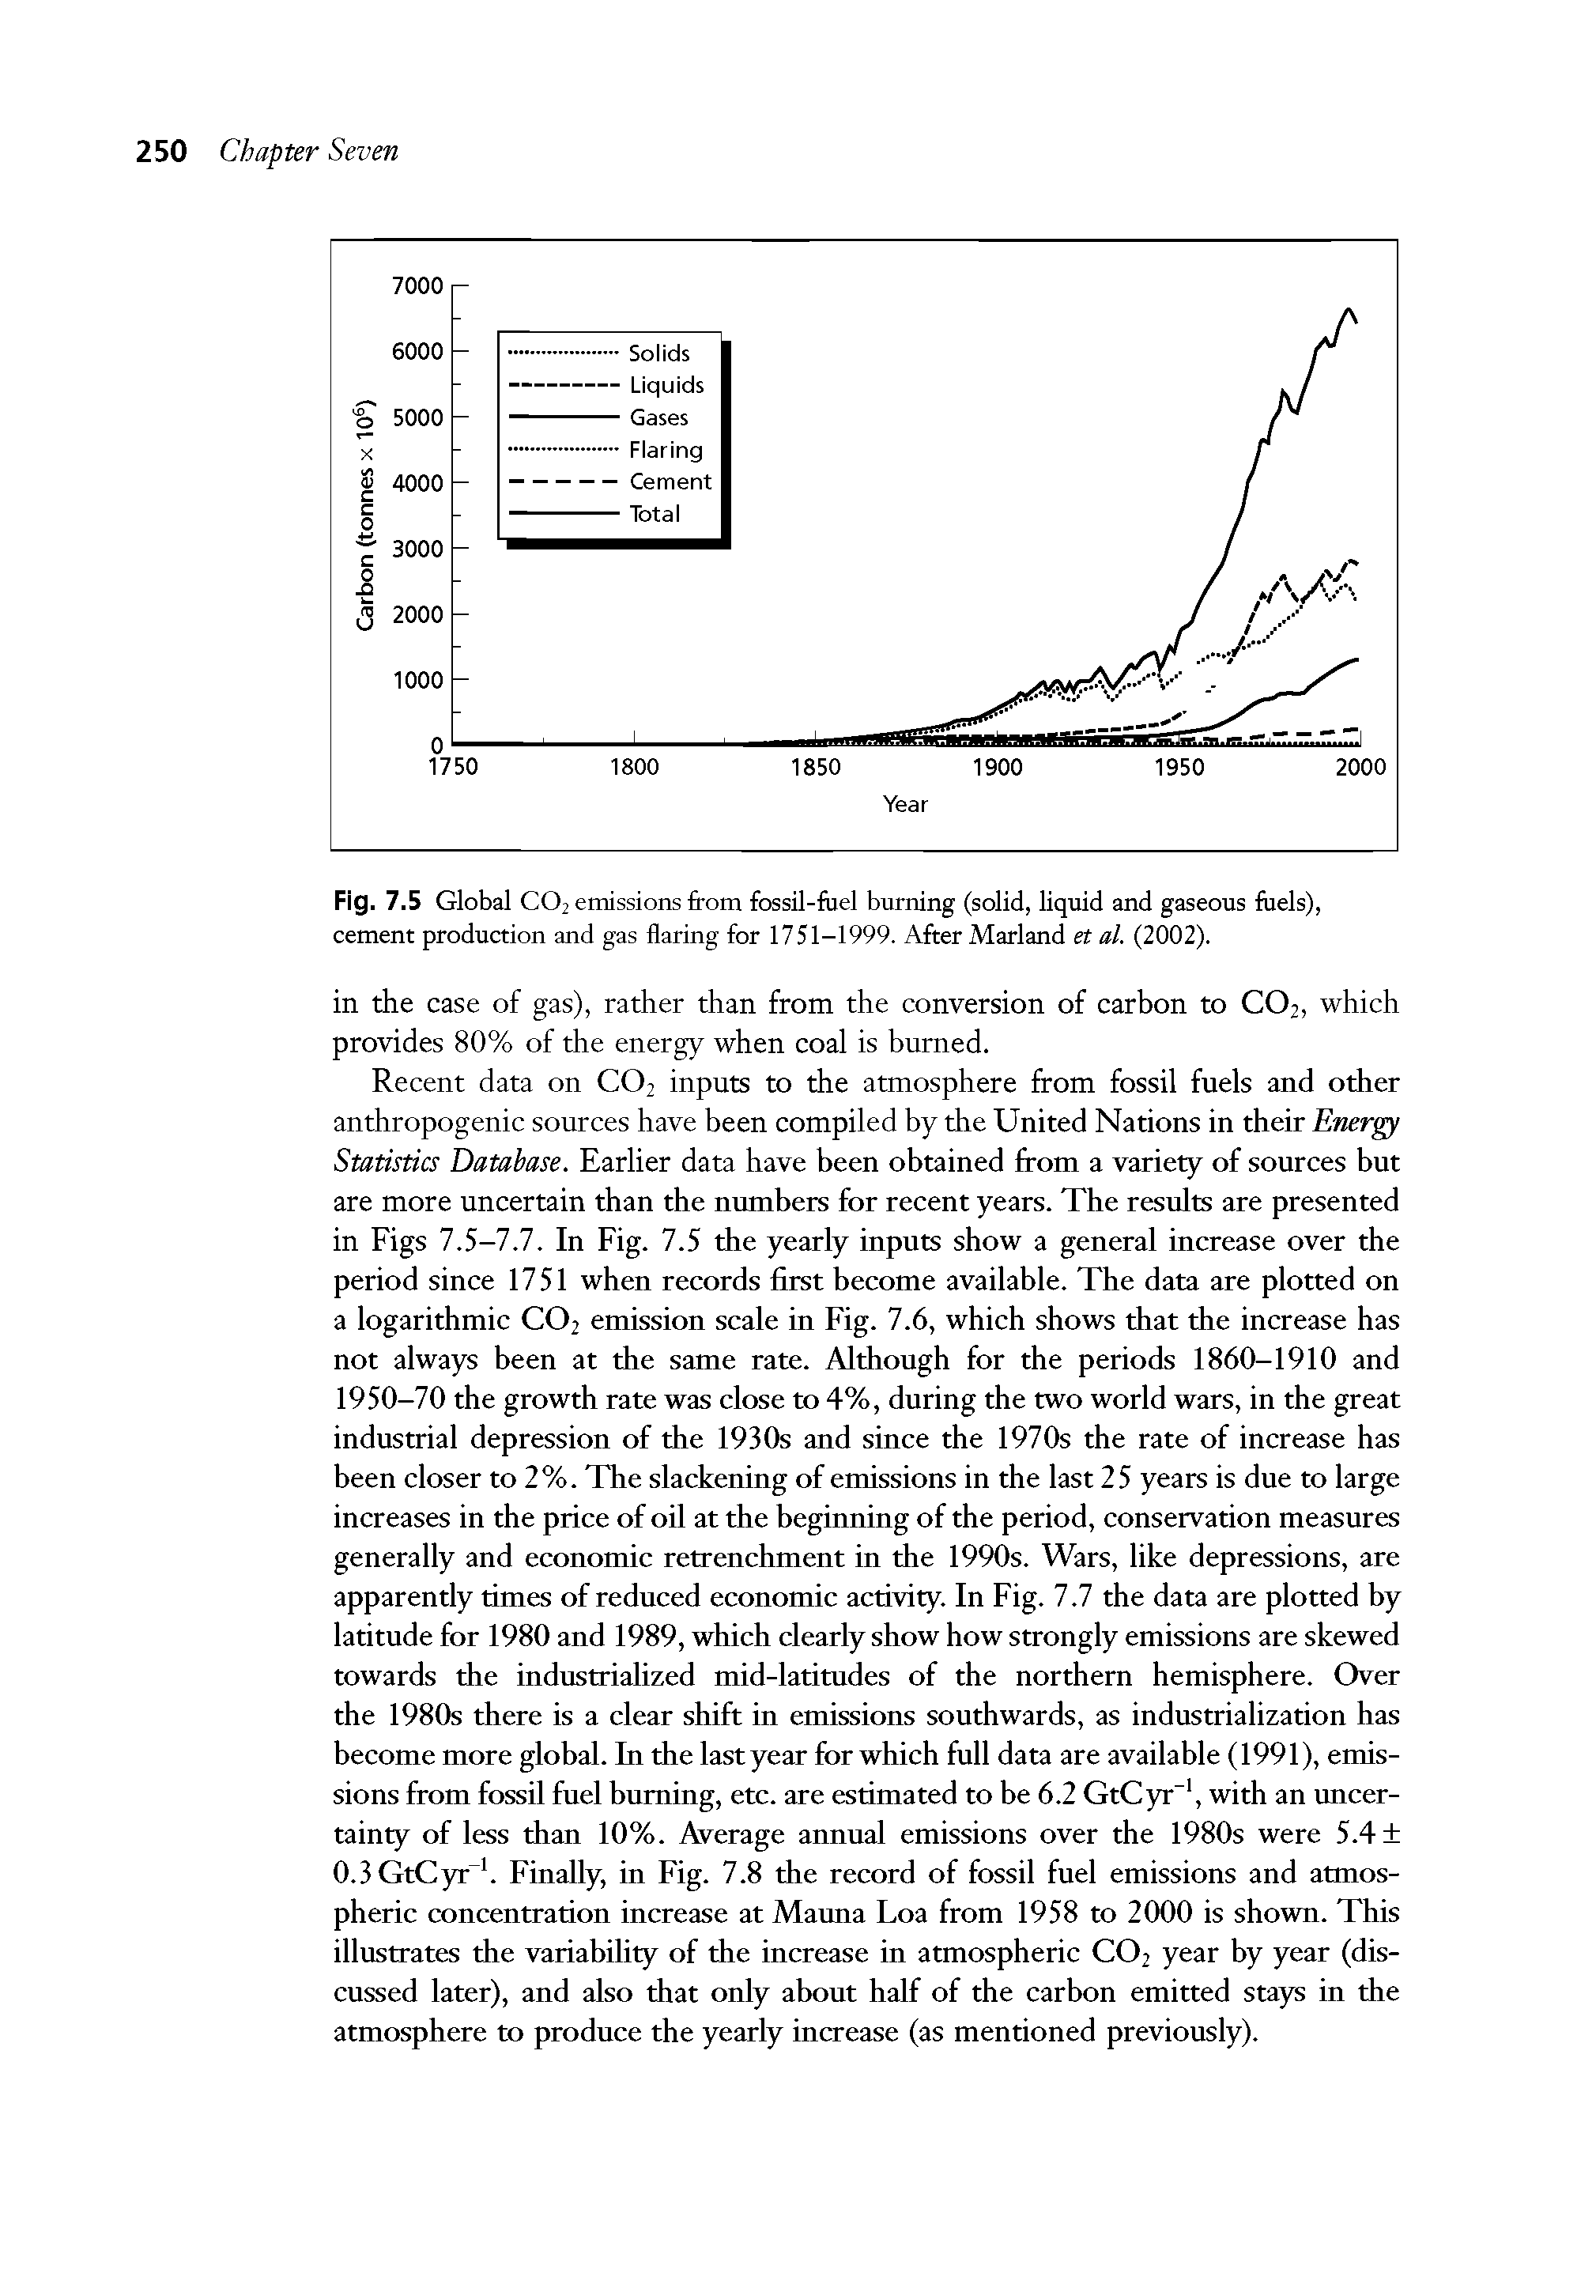 Fig. 7.5 Global C02 emissions from fossil-fuel burning (solid, liquid and gaseous fuels), cement production and gas flaring for 1751-1999. After Marland et al. (2002).